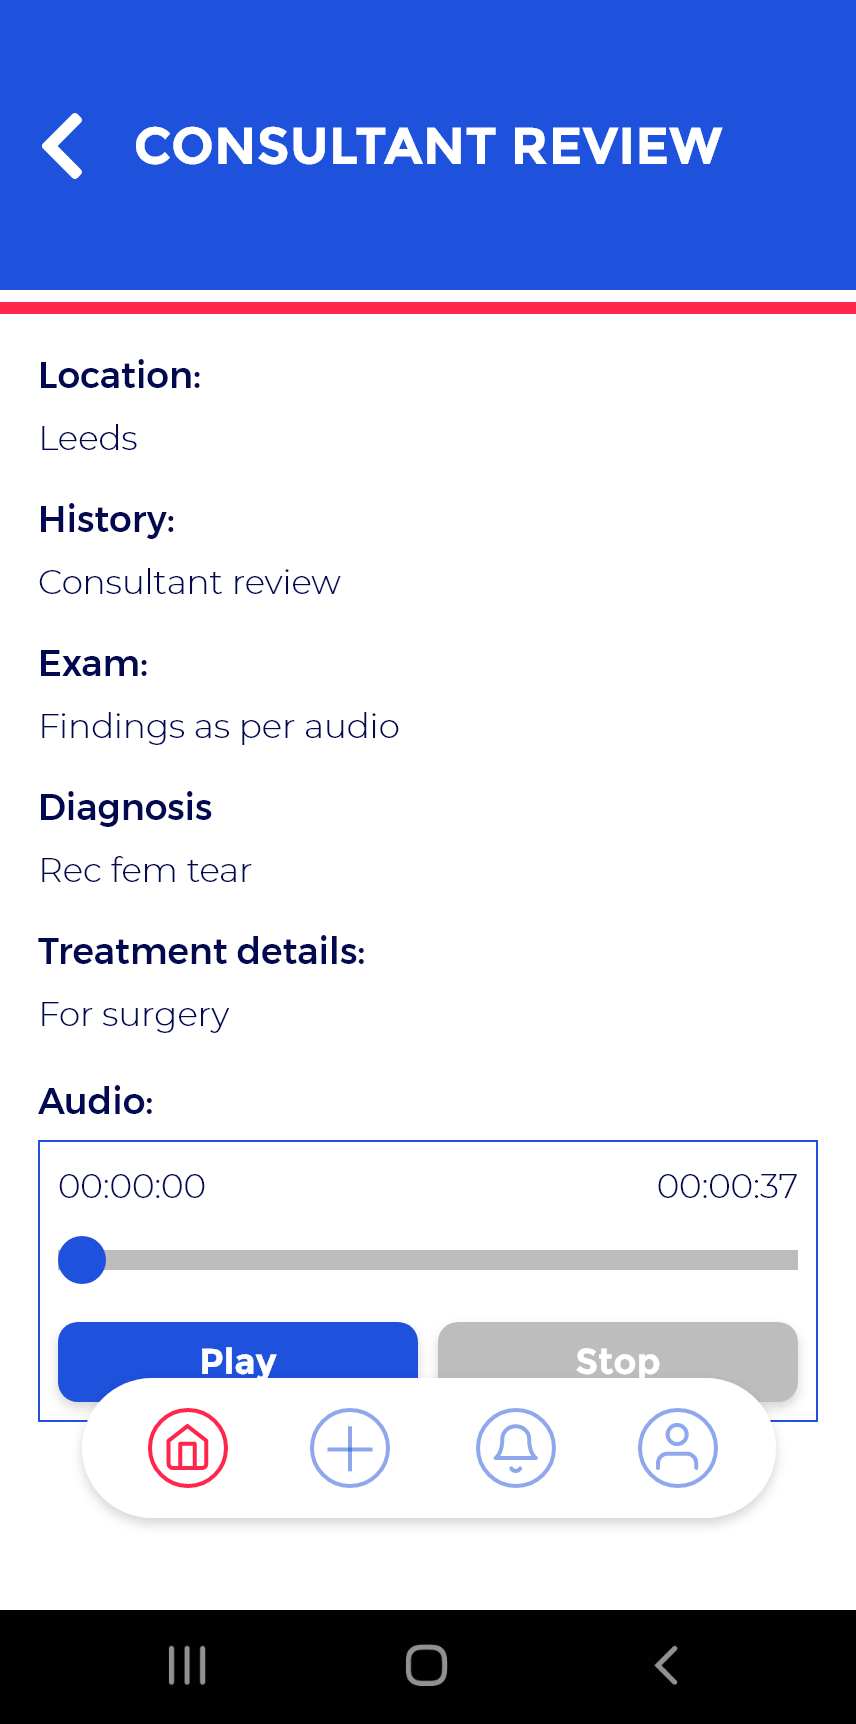 Screenshot of AB3 Medical app consultant review section section